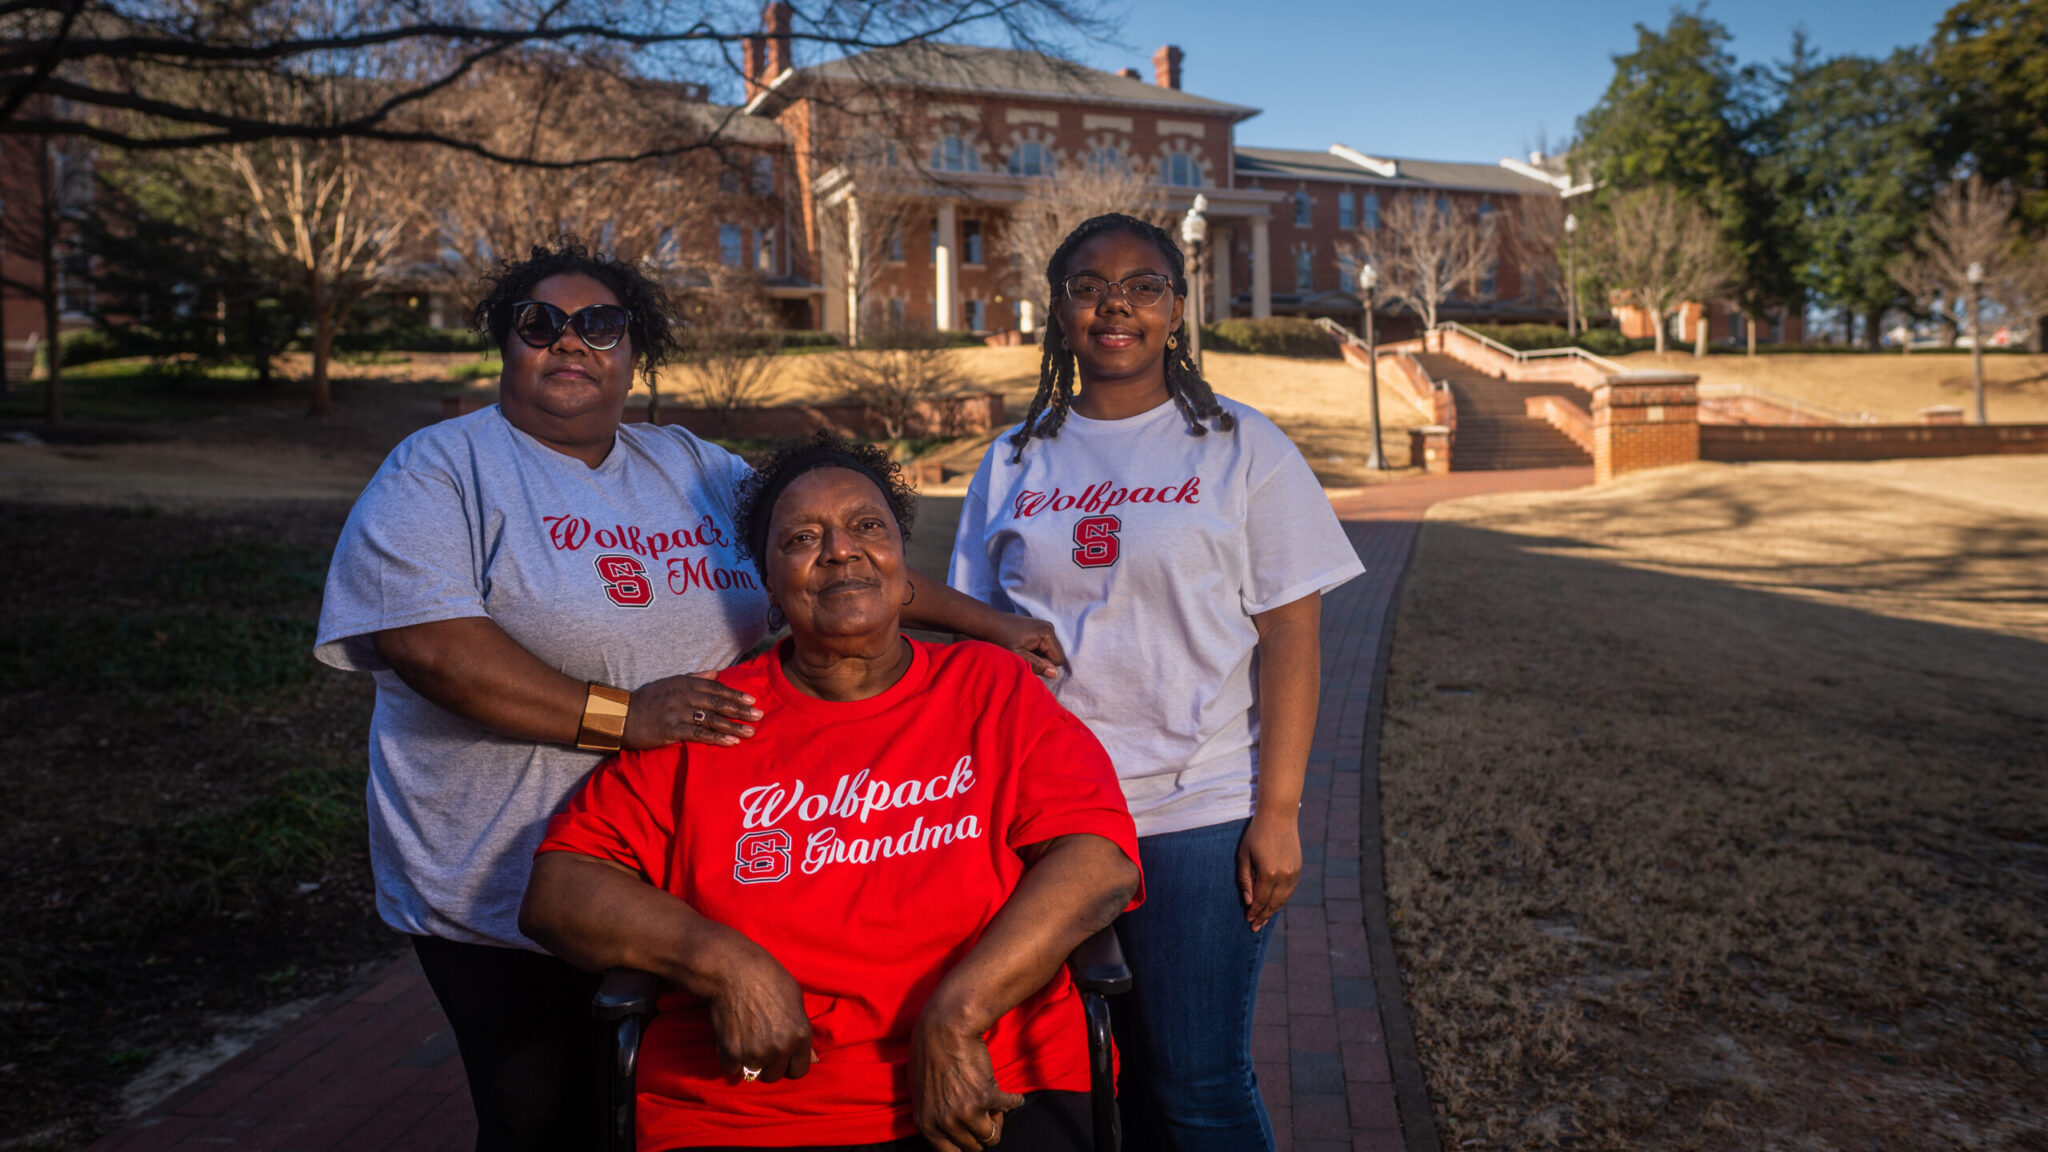 Kacey Cooper '23, right, walks the same path her grandmother Phyllis Brown Harris often took when she worked at NC State, with support from her scholarship and her family, including her mother Kathy Harris Cooper, left. Photo by Marc Hall